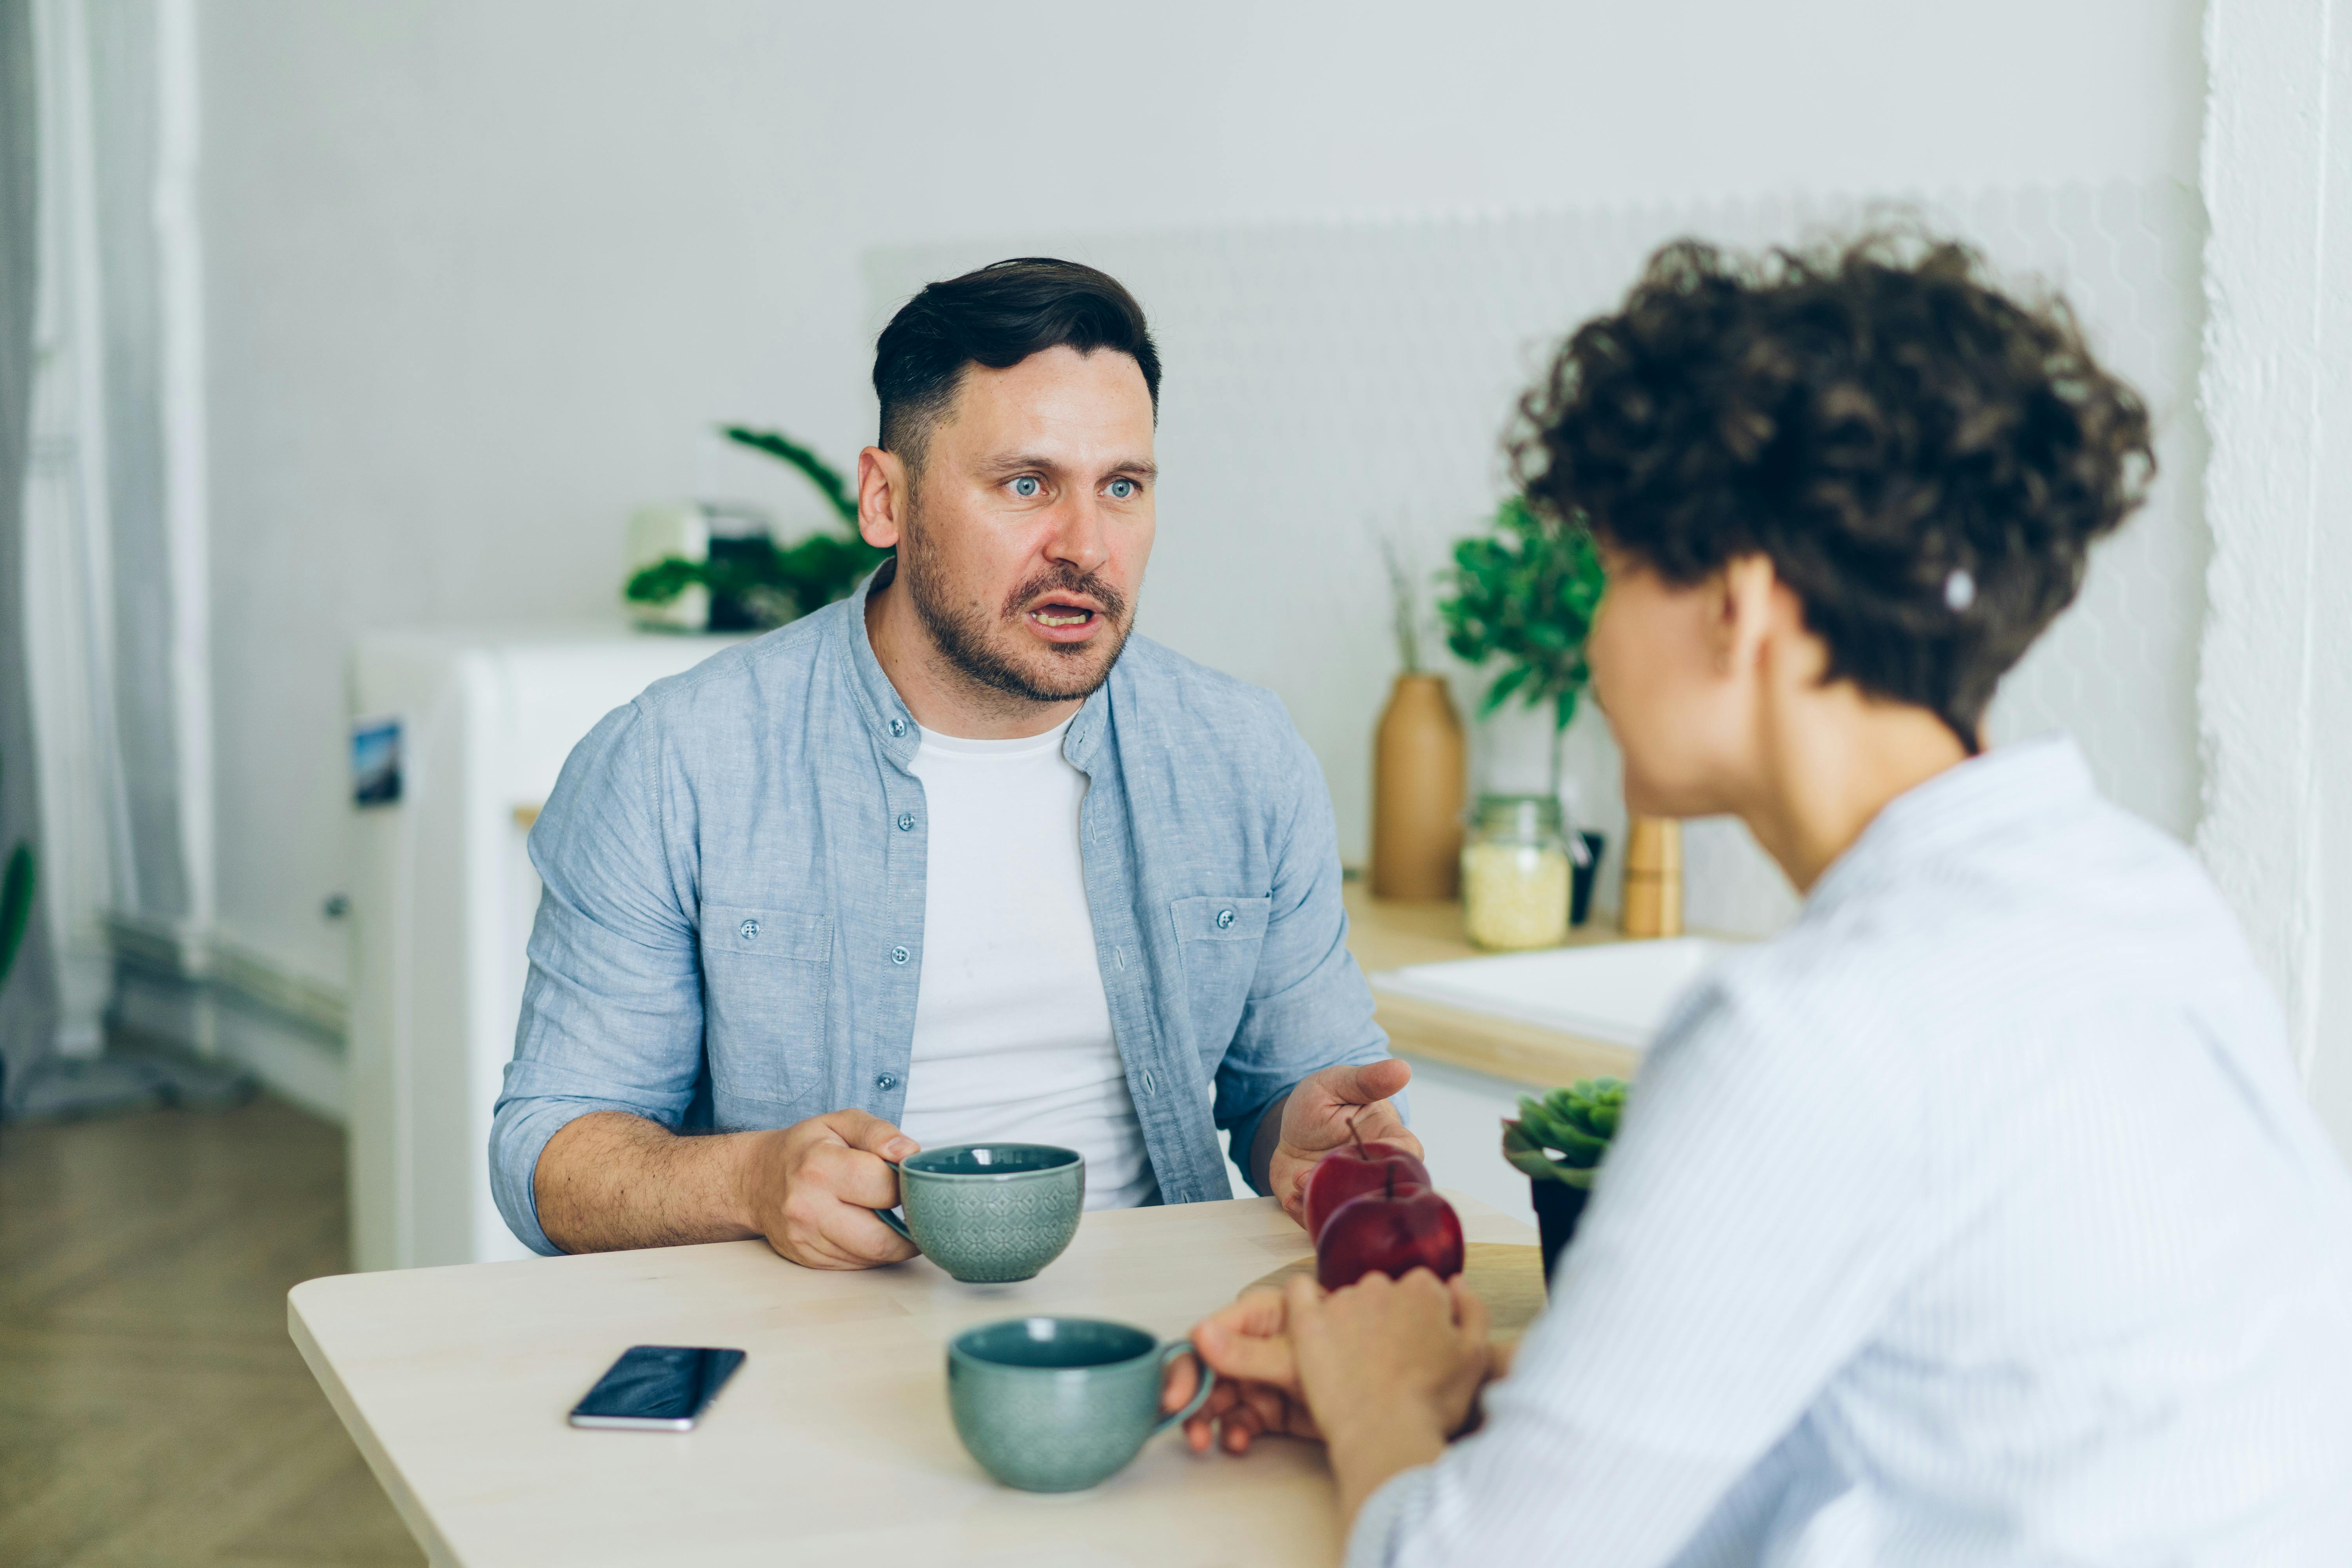 A man and woman arguing in the kitchen | Source: Pexels